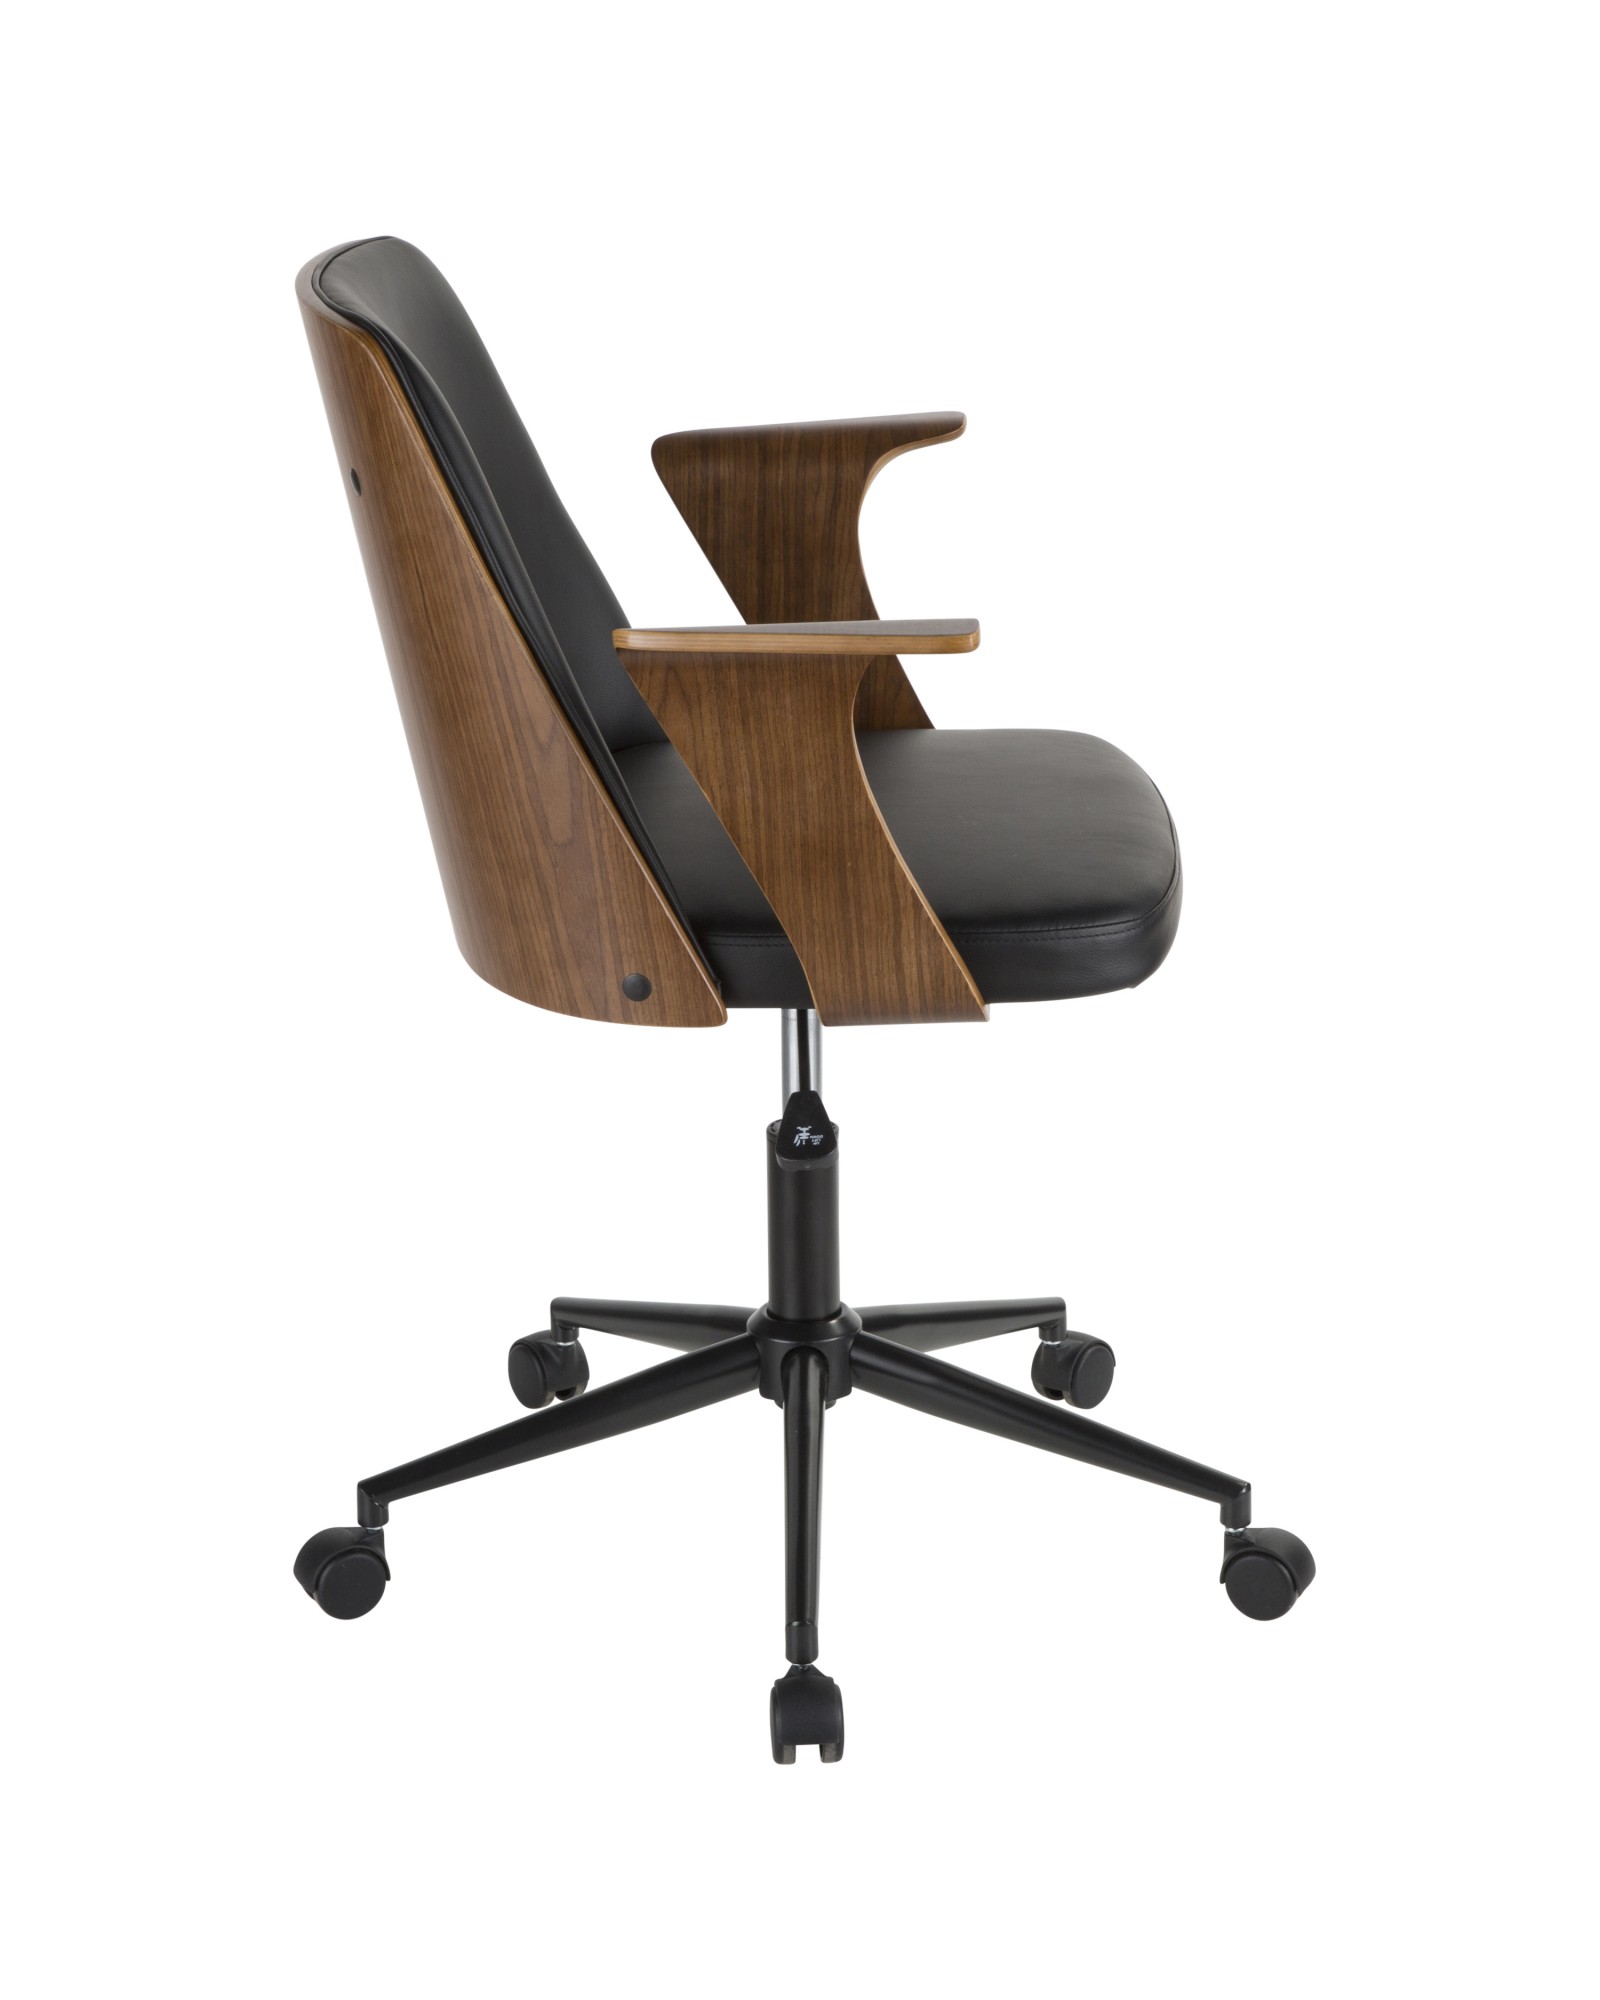 Verdana Mid-Century Modern Office Chair in Walnut Wood and Black Faux Leather